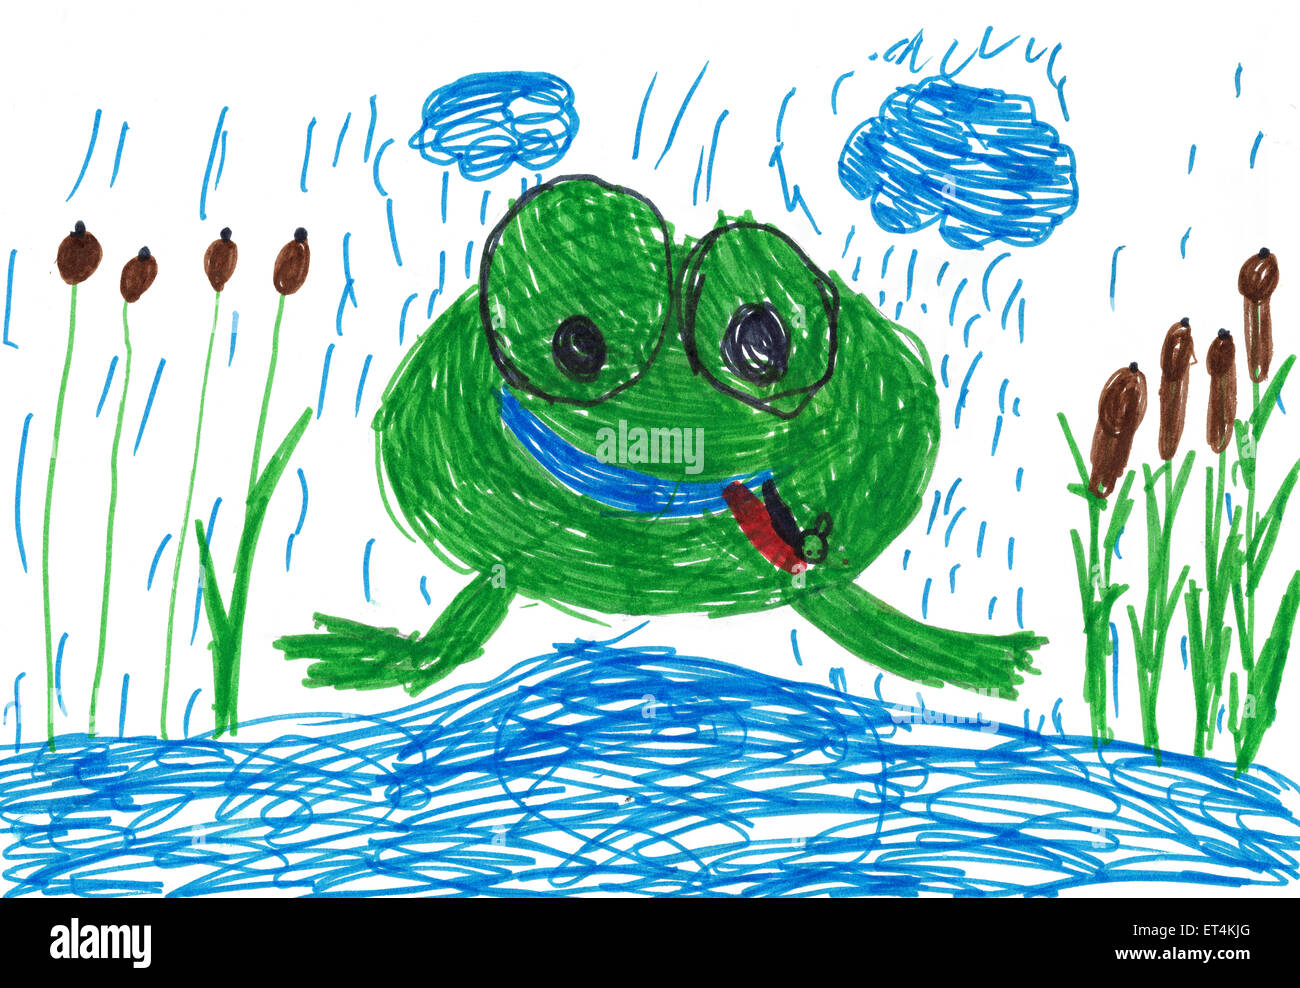 children's drawing. funny frog with tongue out Stock Photo